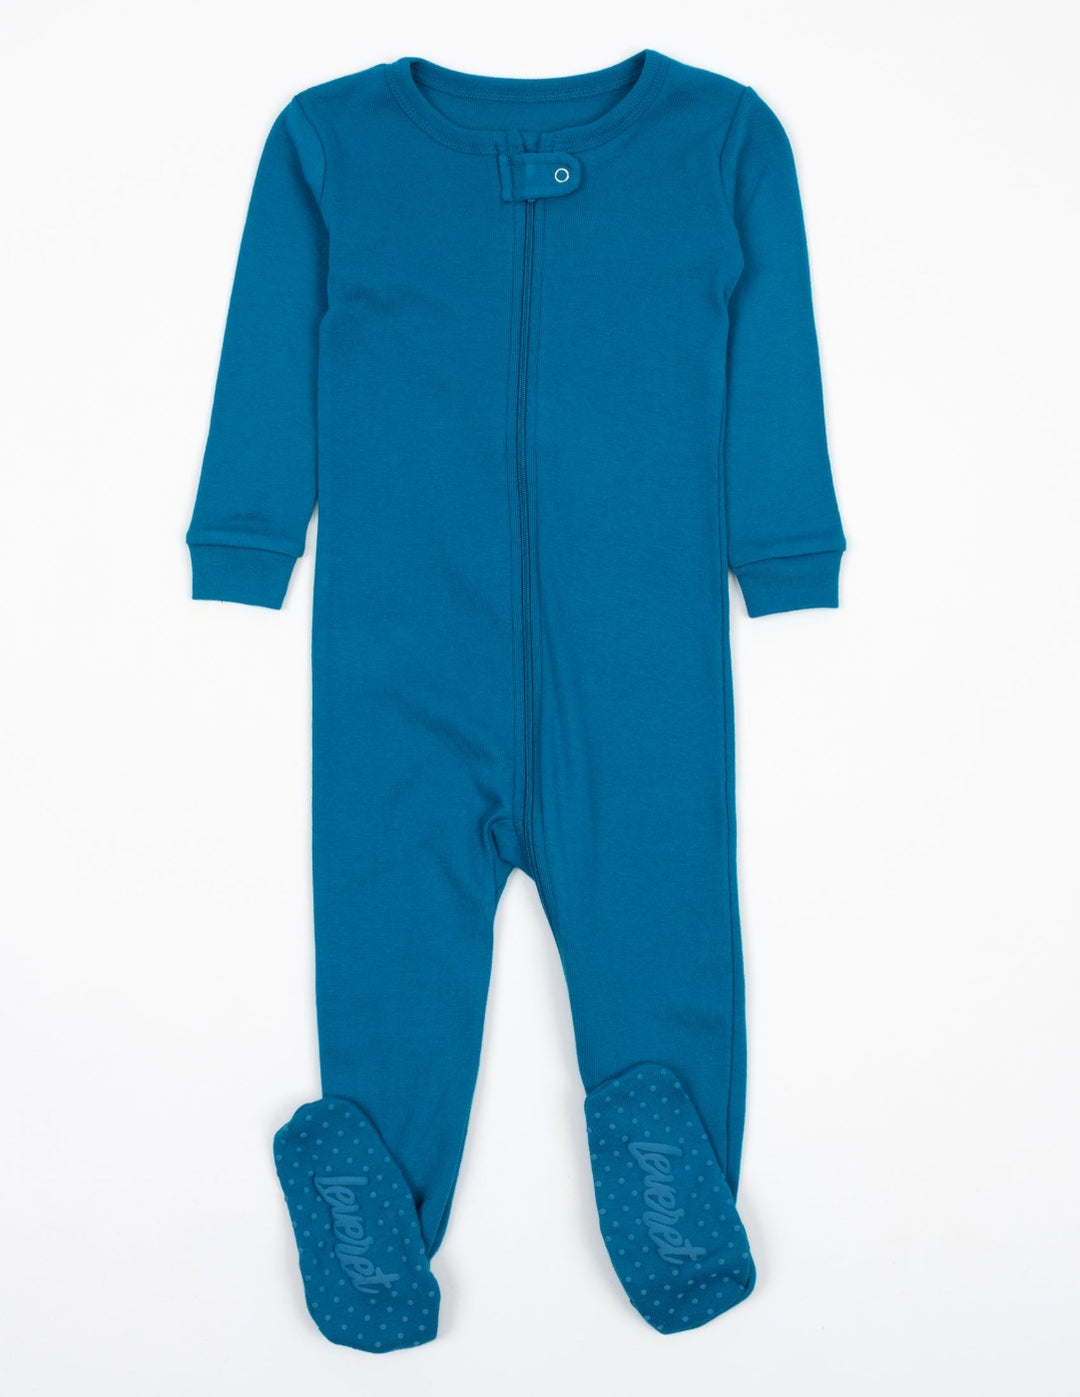 solid color teal blue baby footed pajama